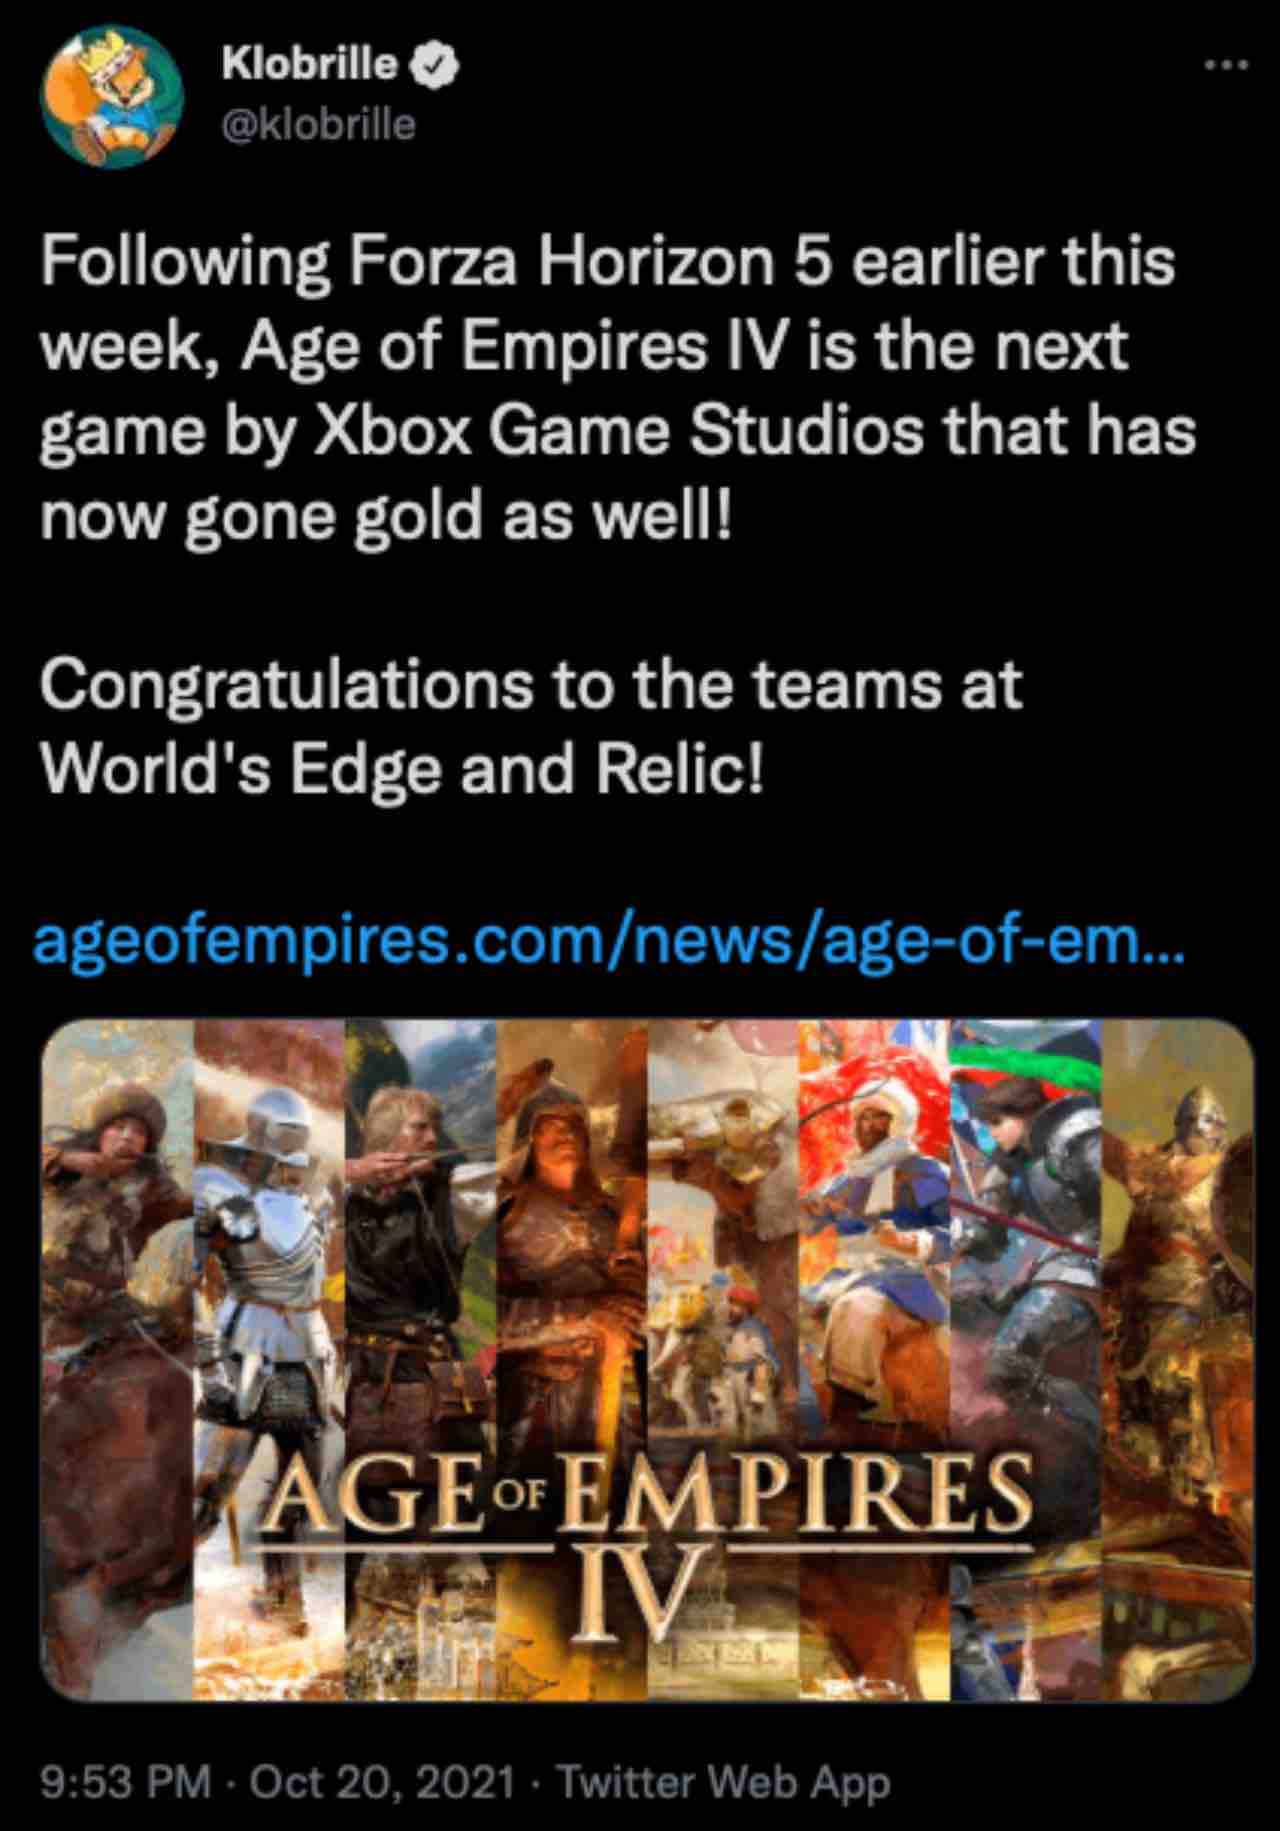 age of empire iv